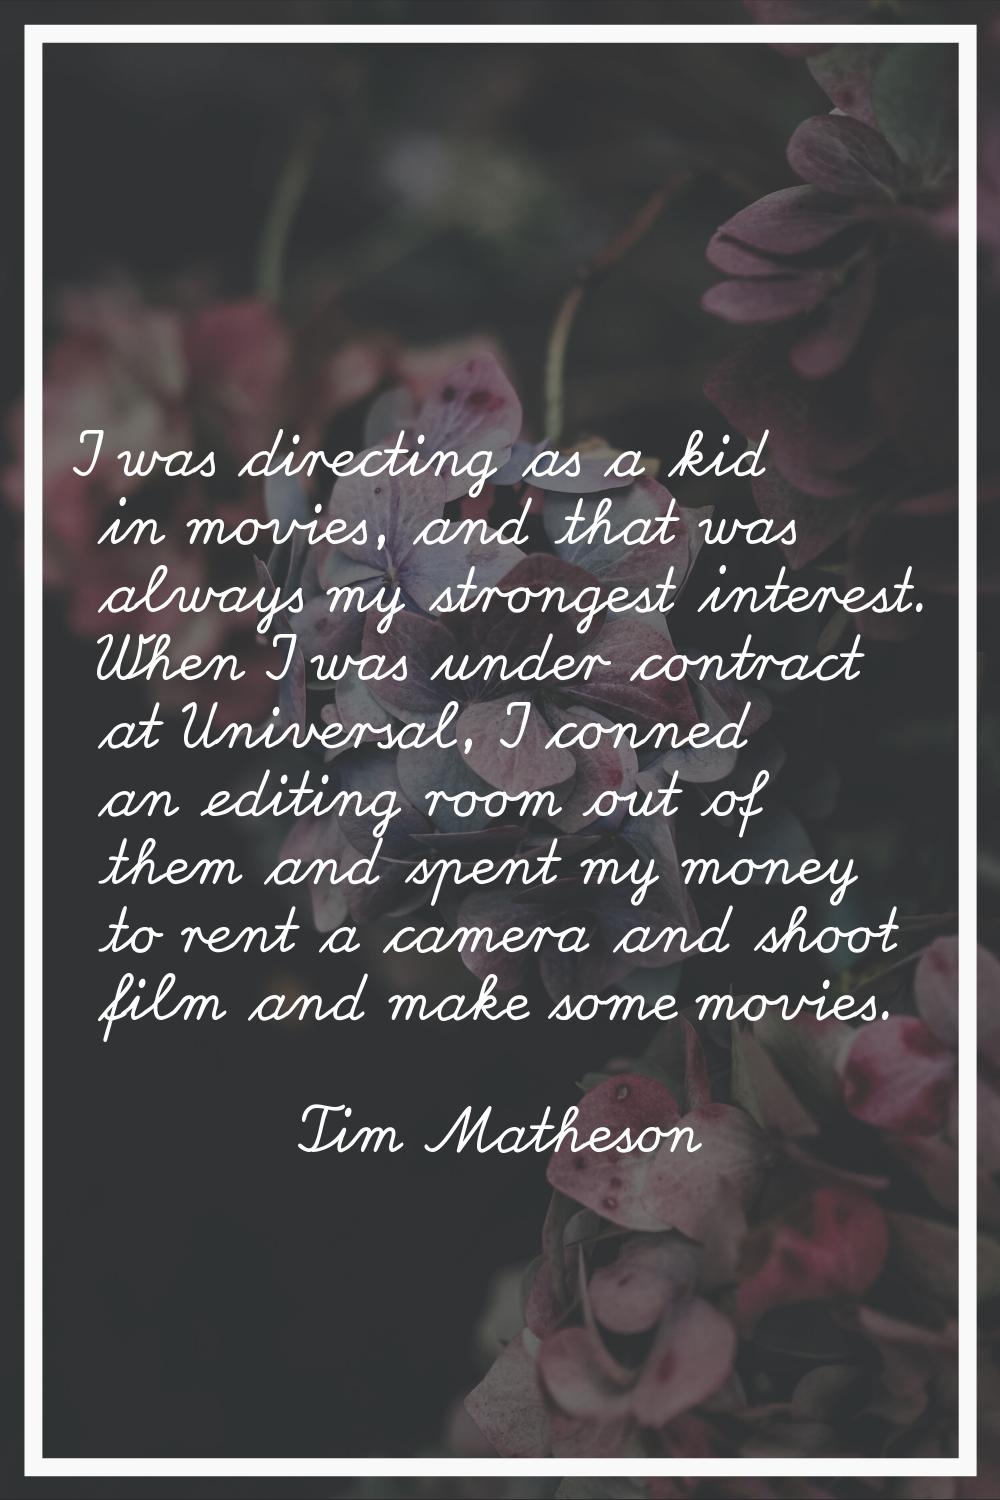 I was directing as a kid in movies, and that was always my strongest interest. When I was under con